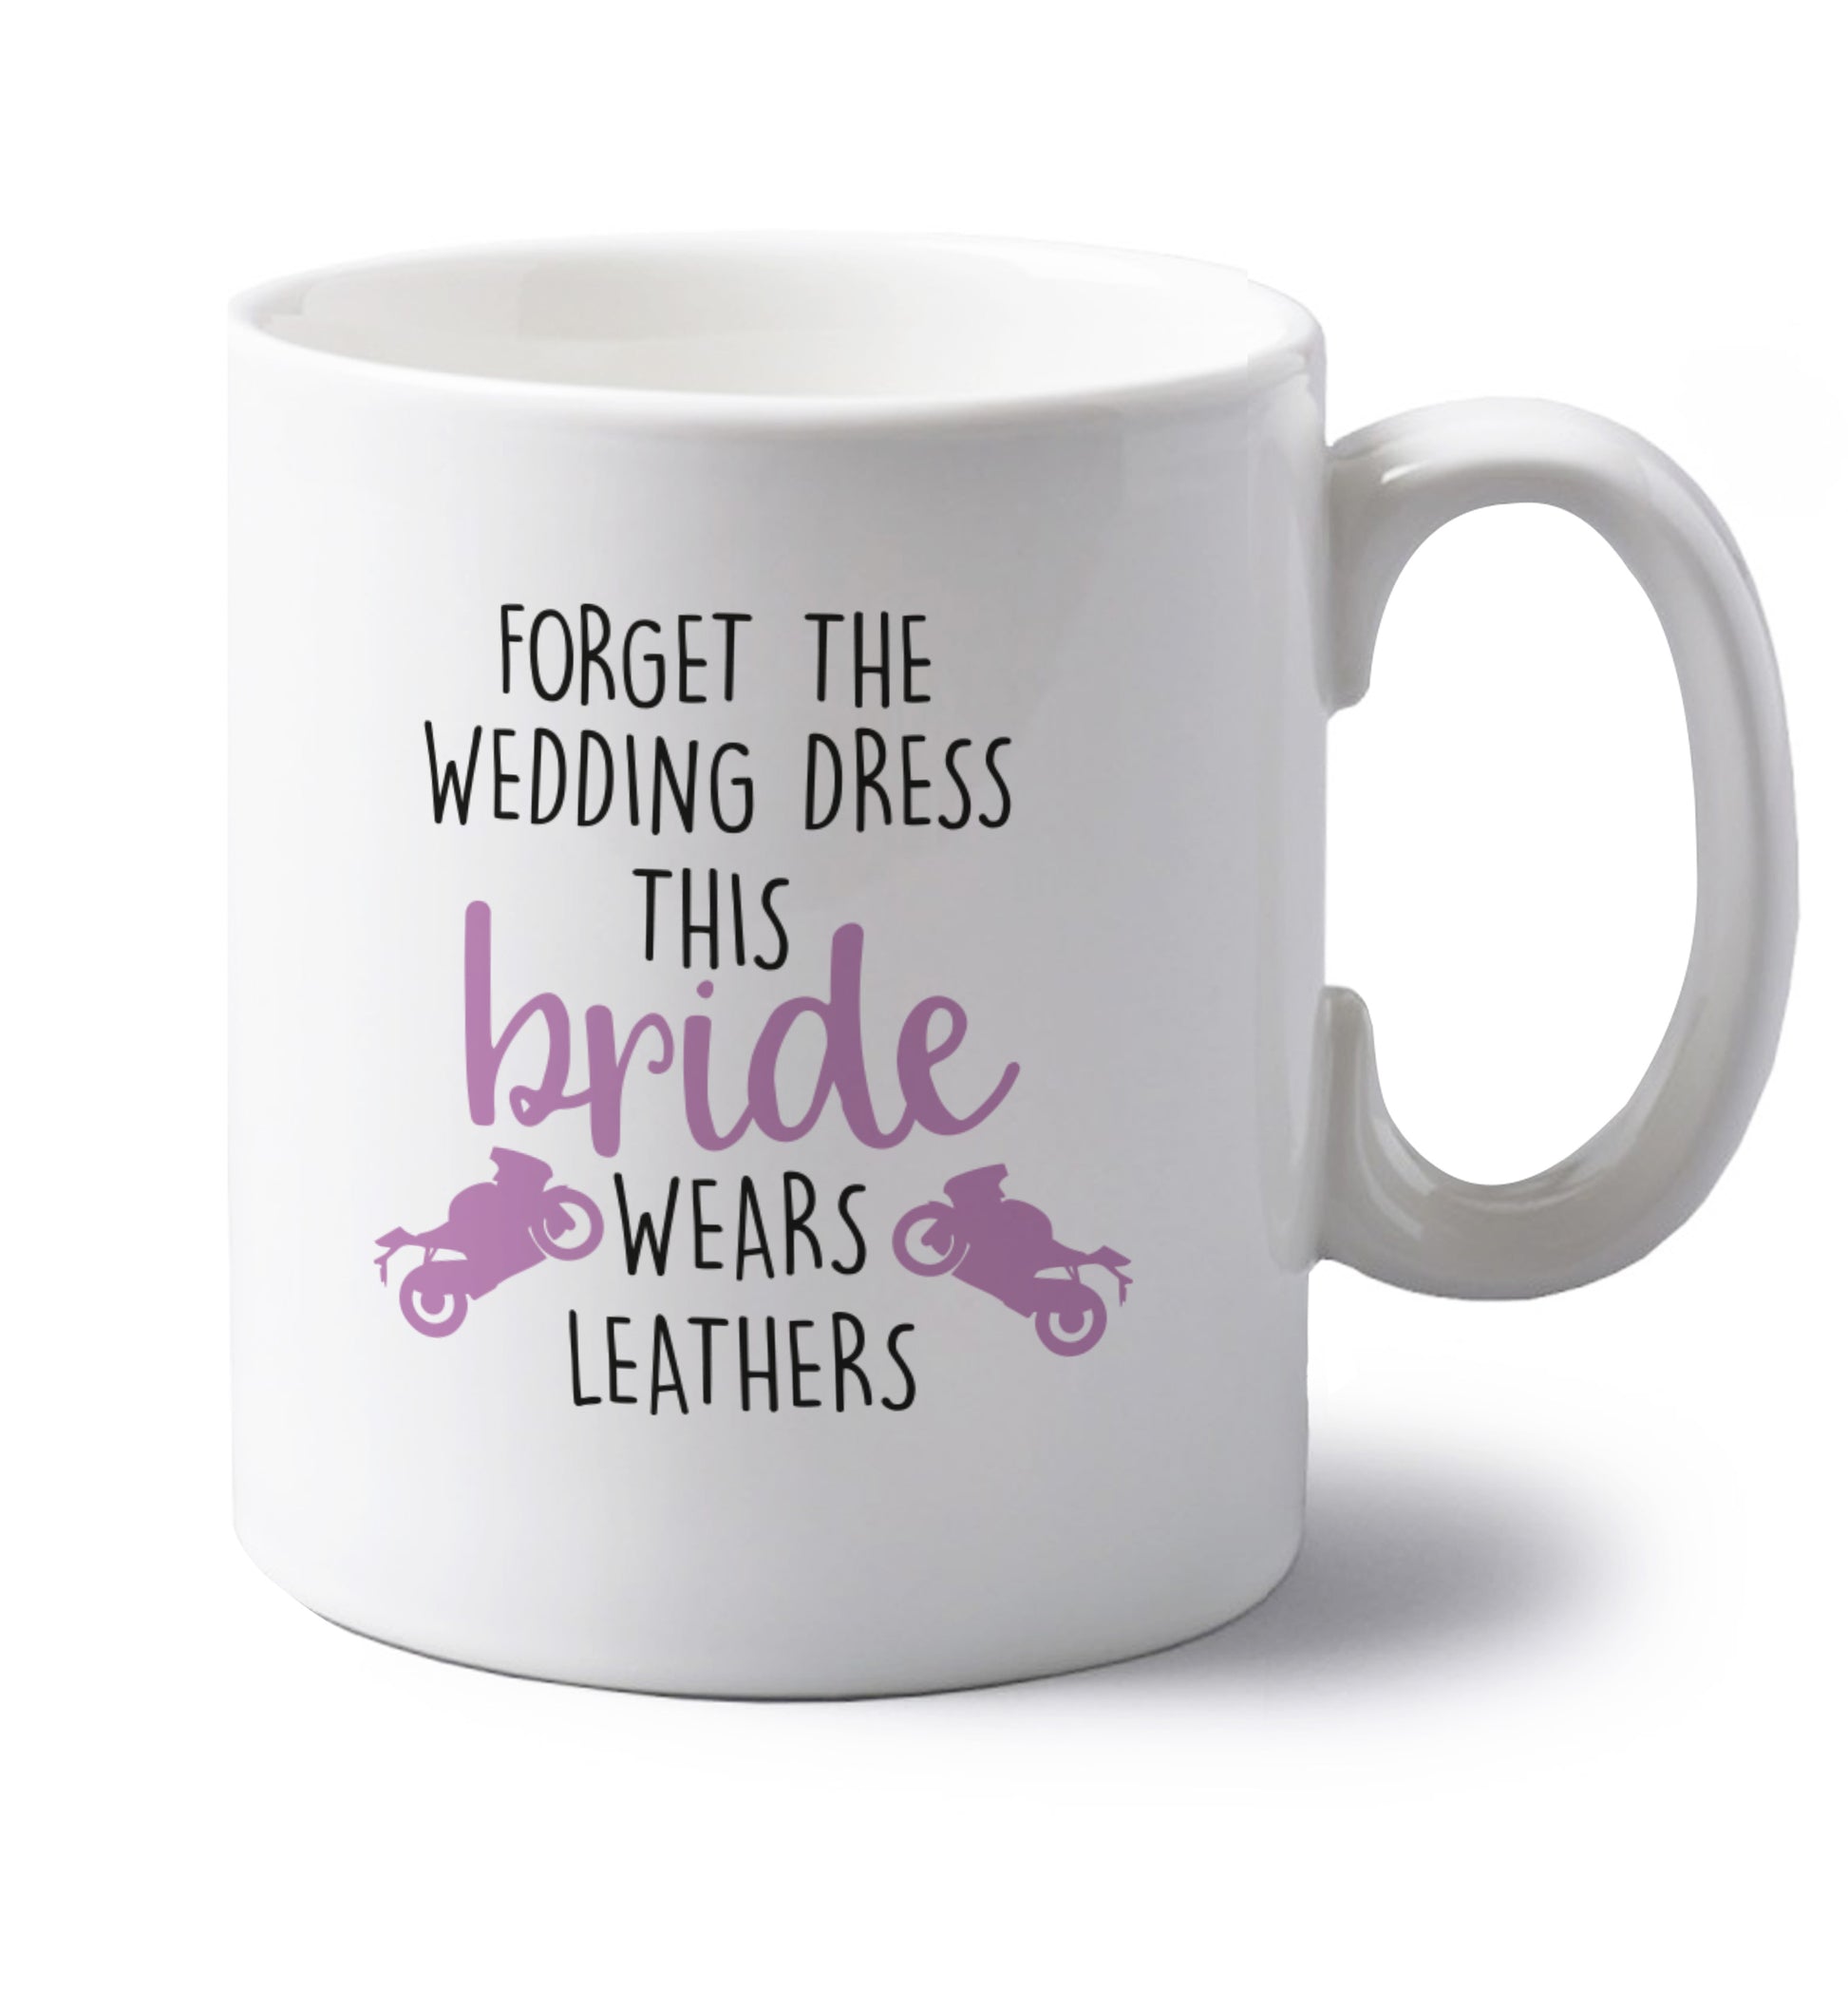 Forget the wedding dress this bride wears leathers left handed white ceramic mug 